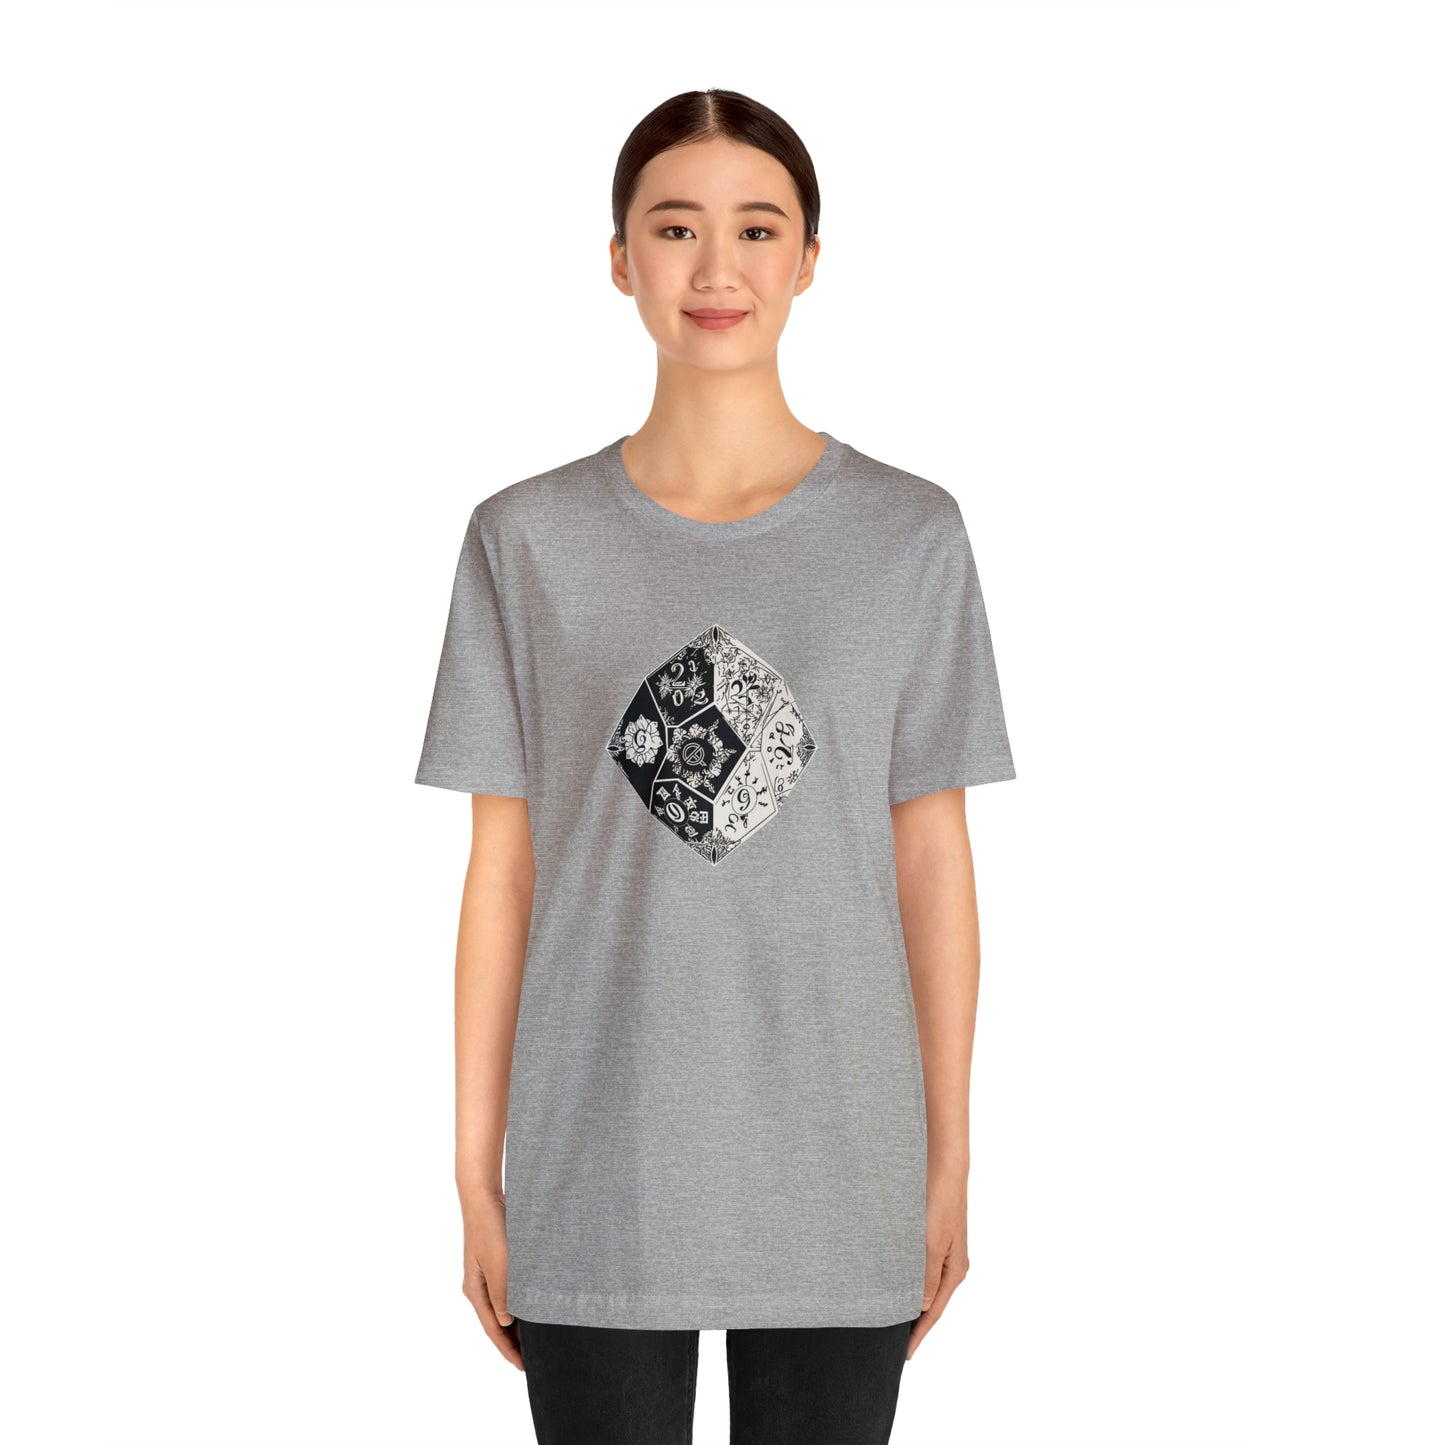 athletic-heather-quest-thread-tee-shirt-with-large-black-and-white-artistic-dice-on-center